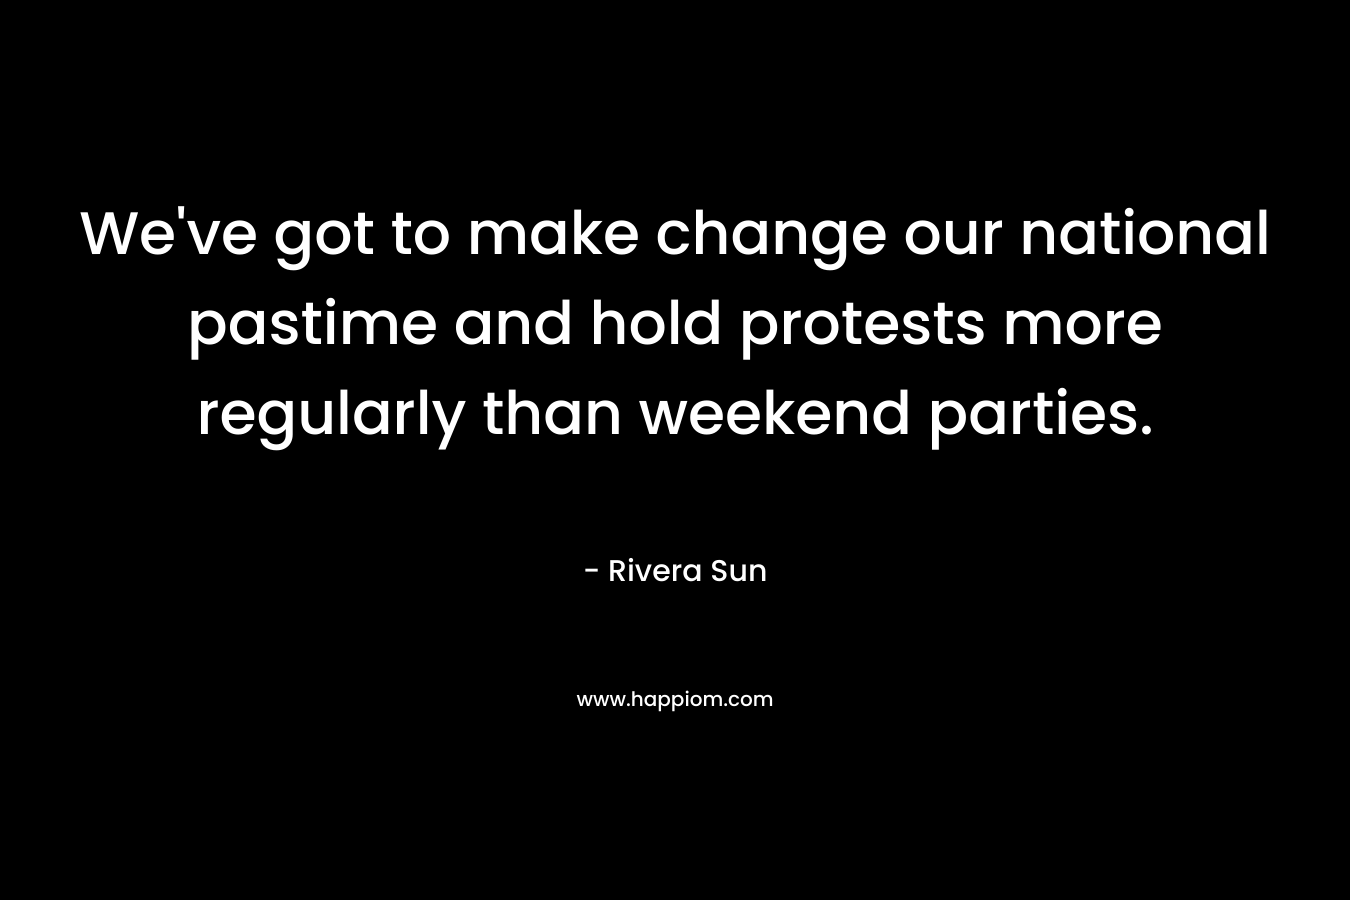 We’ve got to make change our national pastime and hold protests more regularly than weekend parties. – Rivera Sun